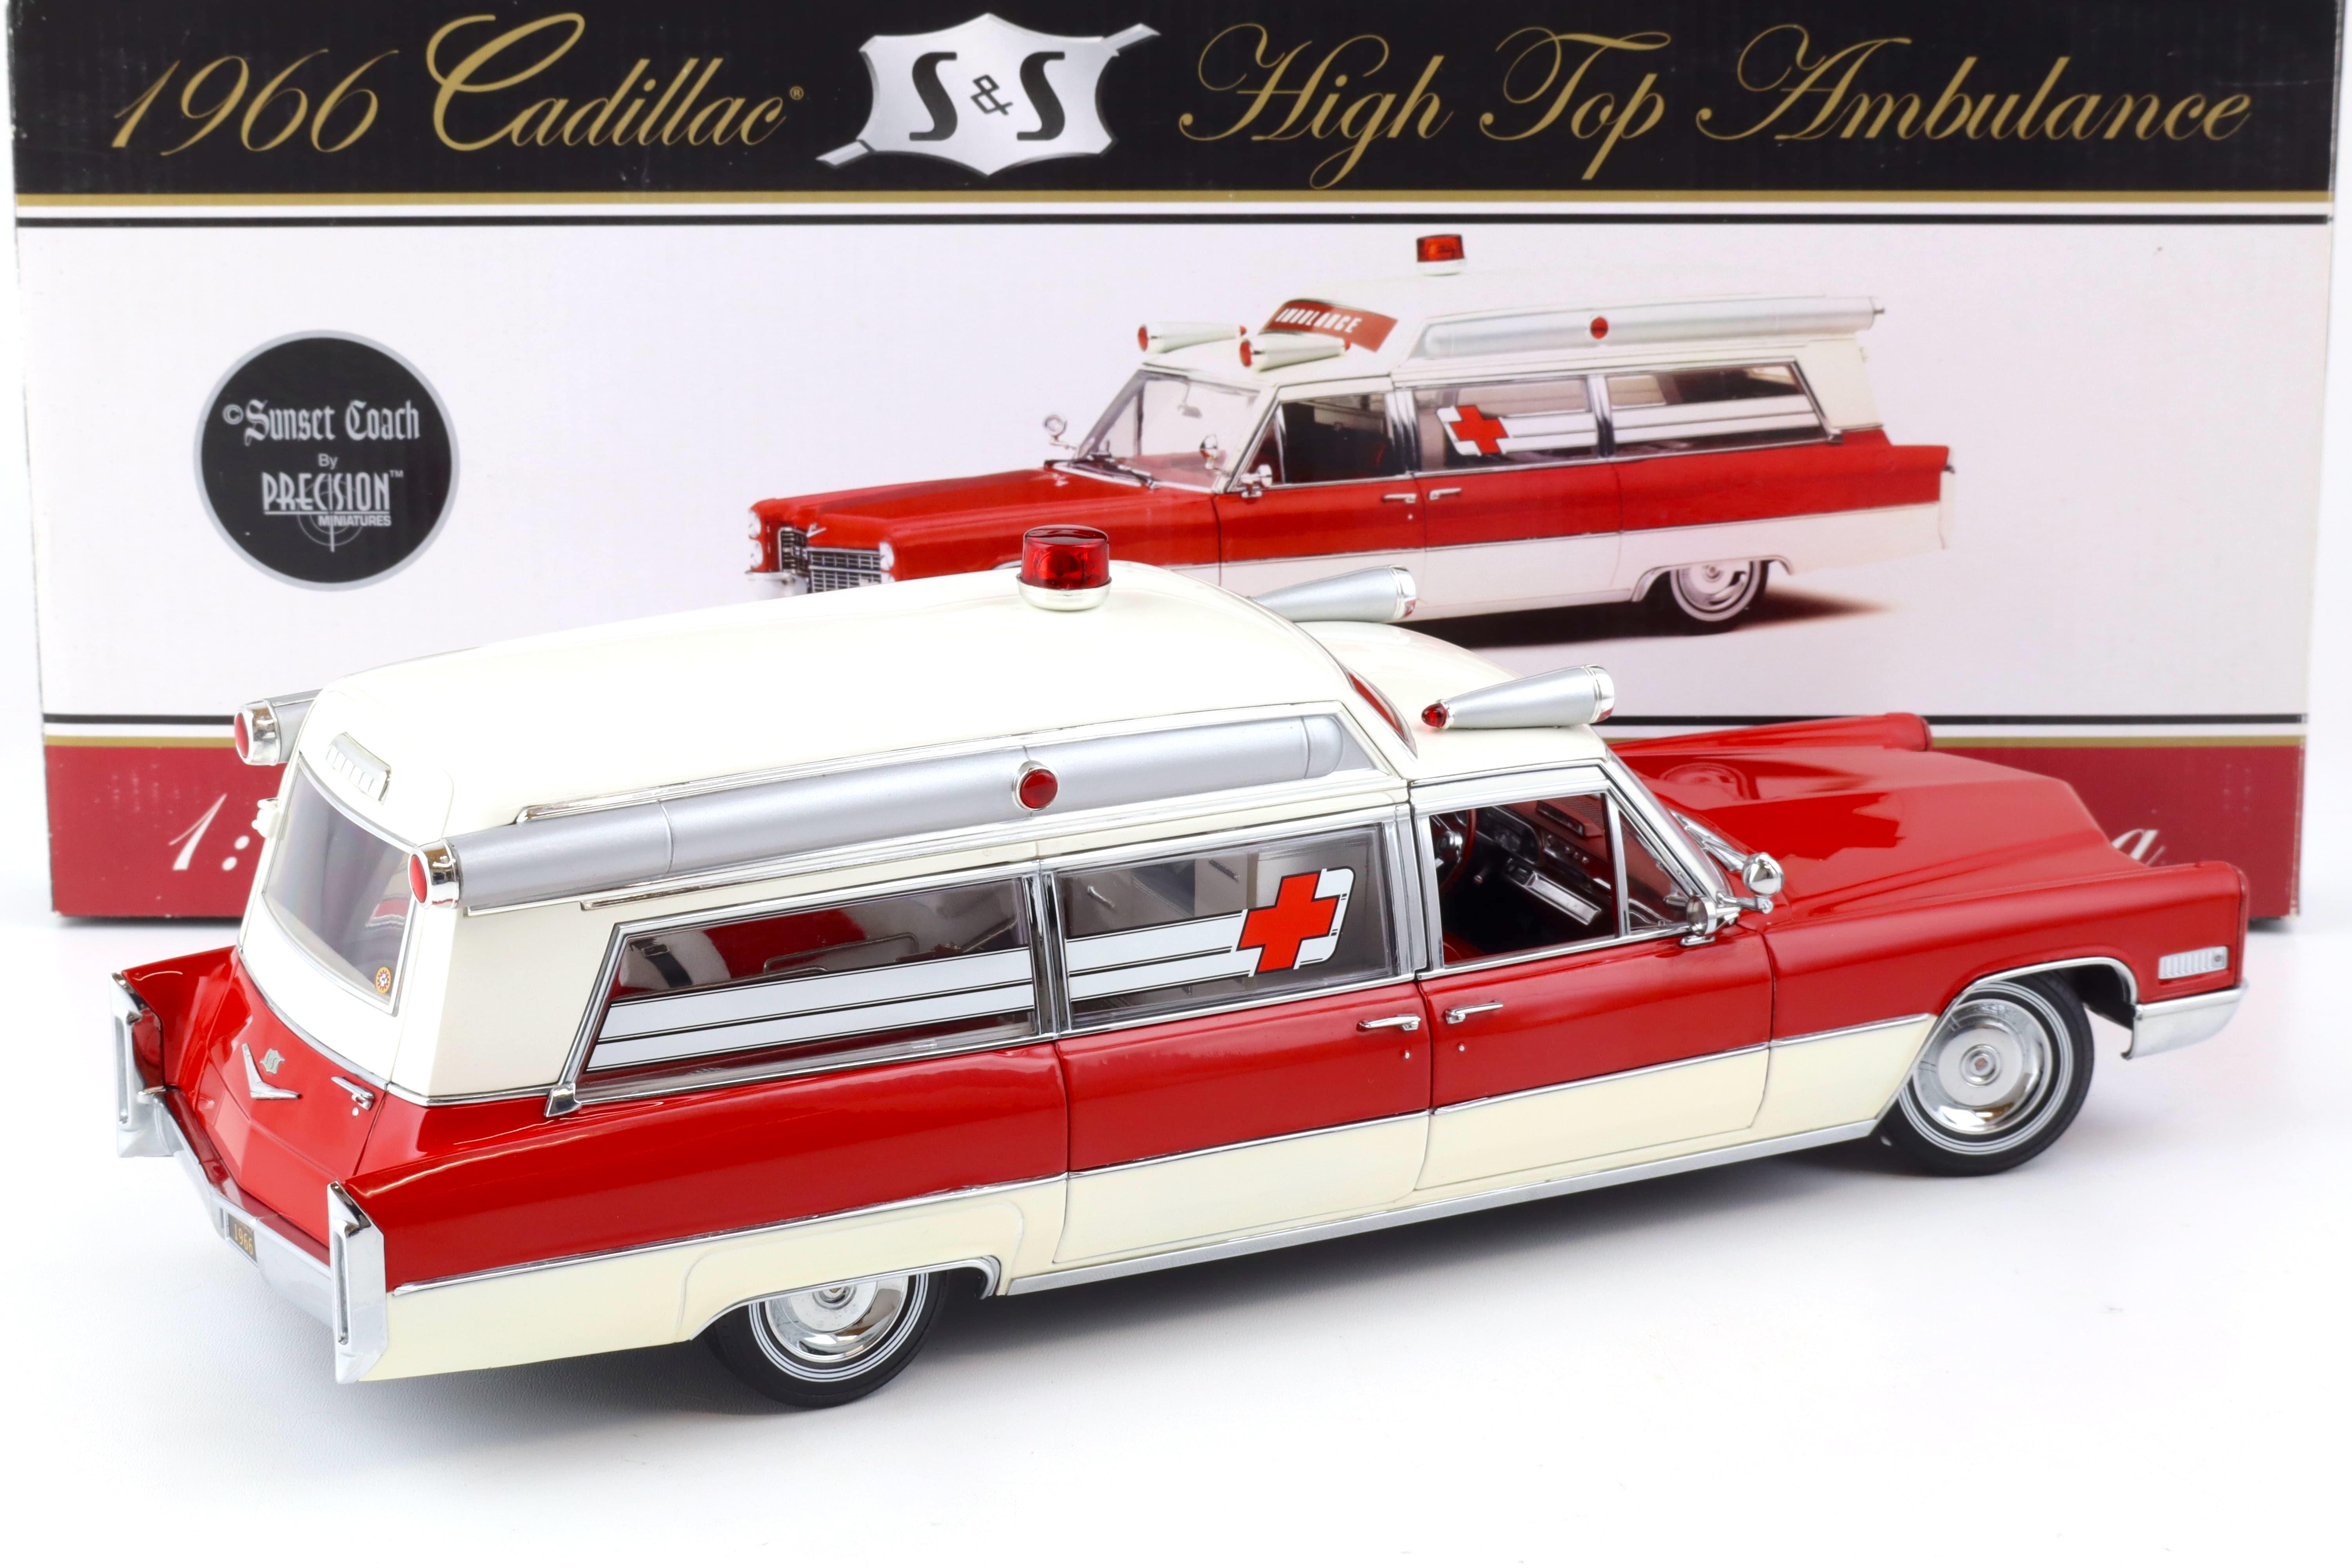 1:18 Sunset Coach Precision 1966 Cadillac S&S High Top Ambulance red/ white